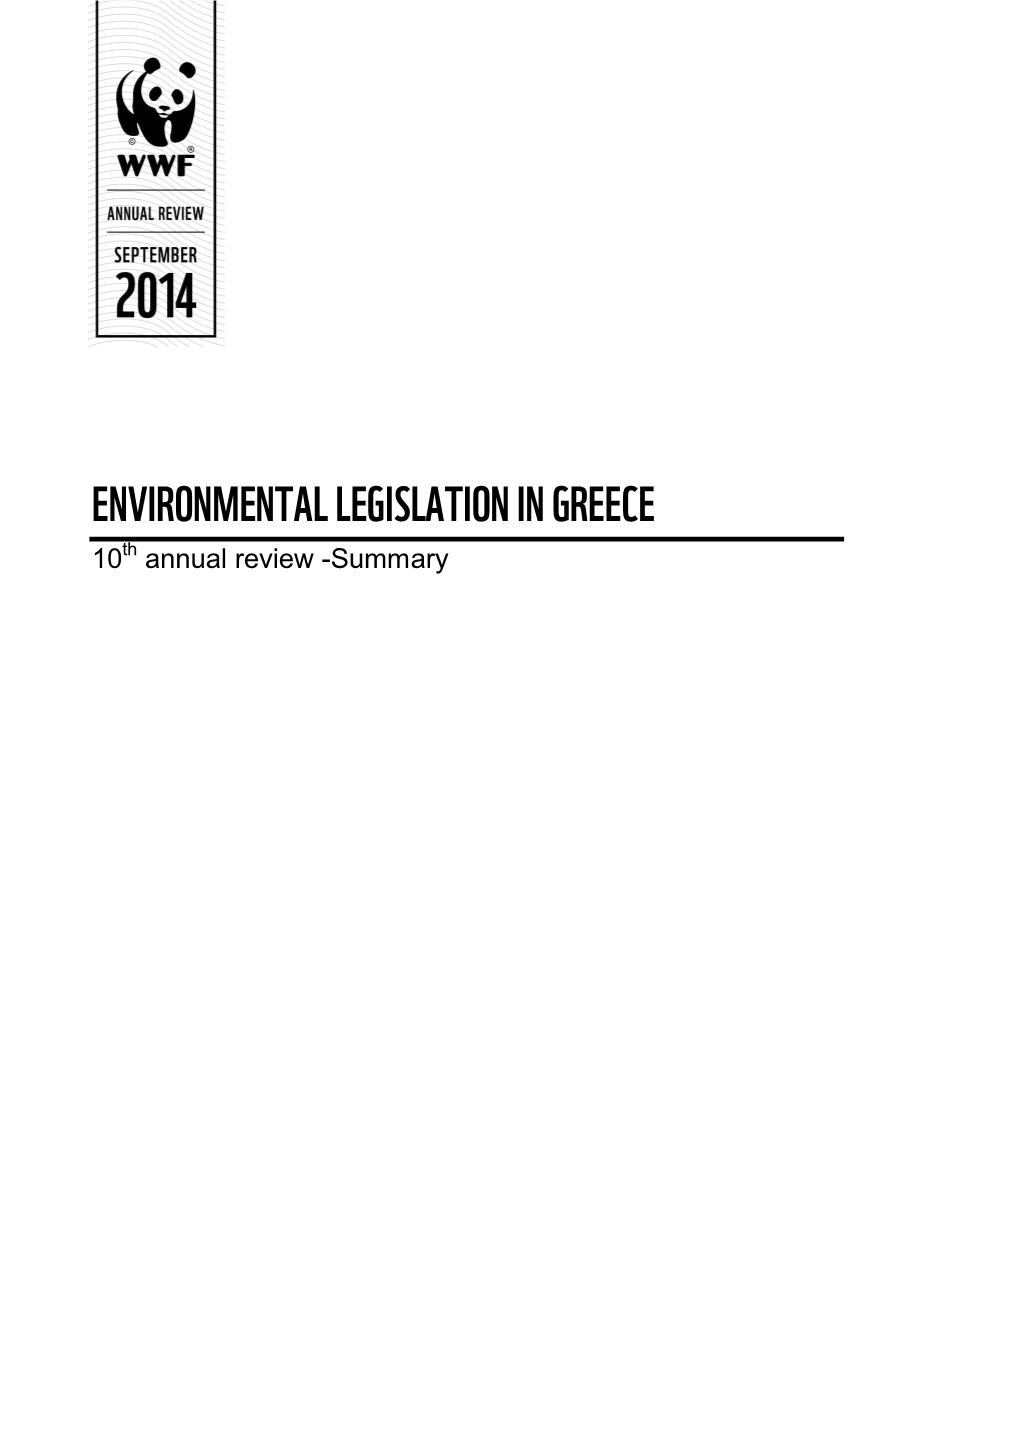 ENVIRONMENTAL LEGISLATION in GREECE 10Th Annual Review -Summary CONTENTS